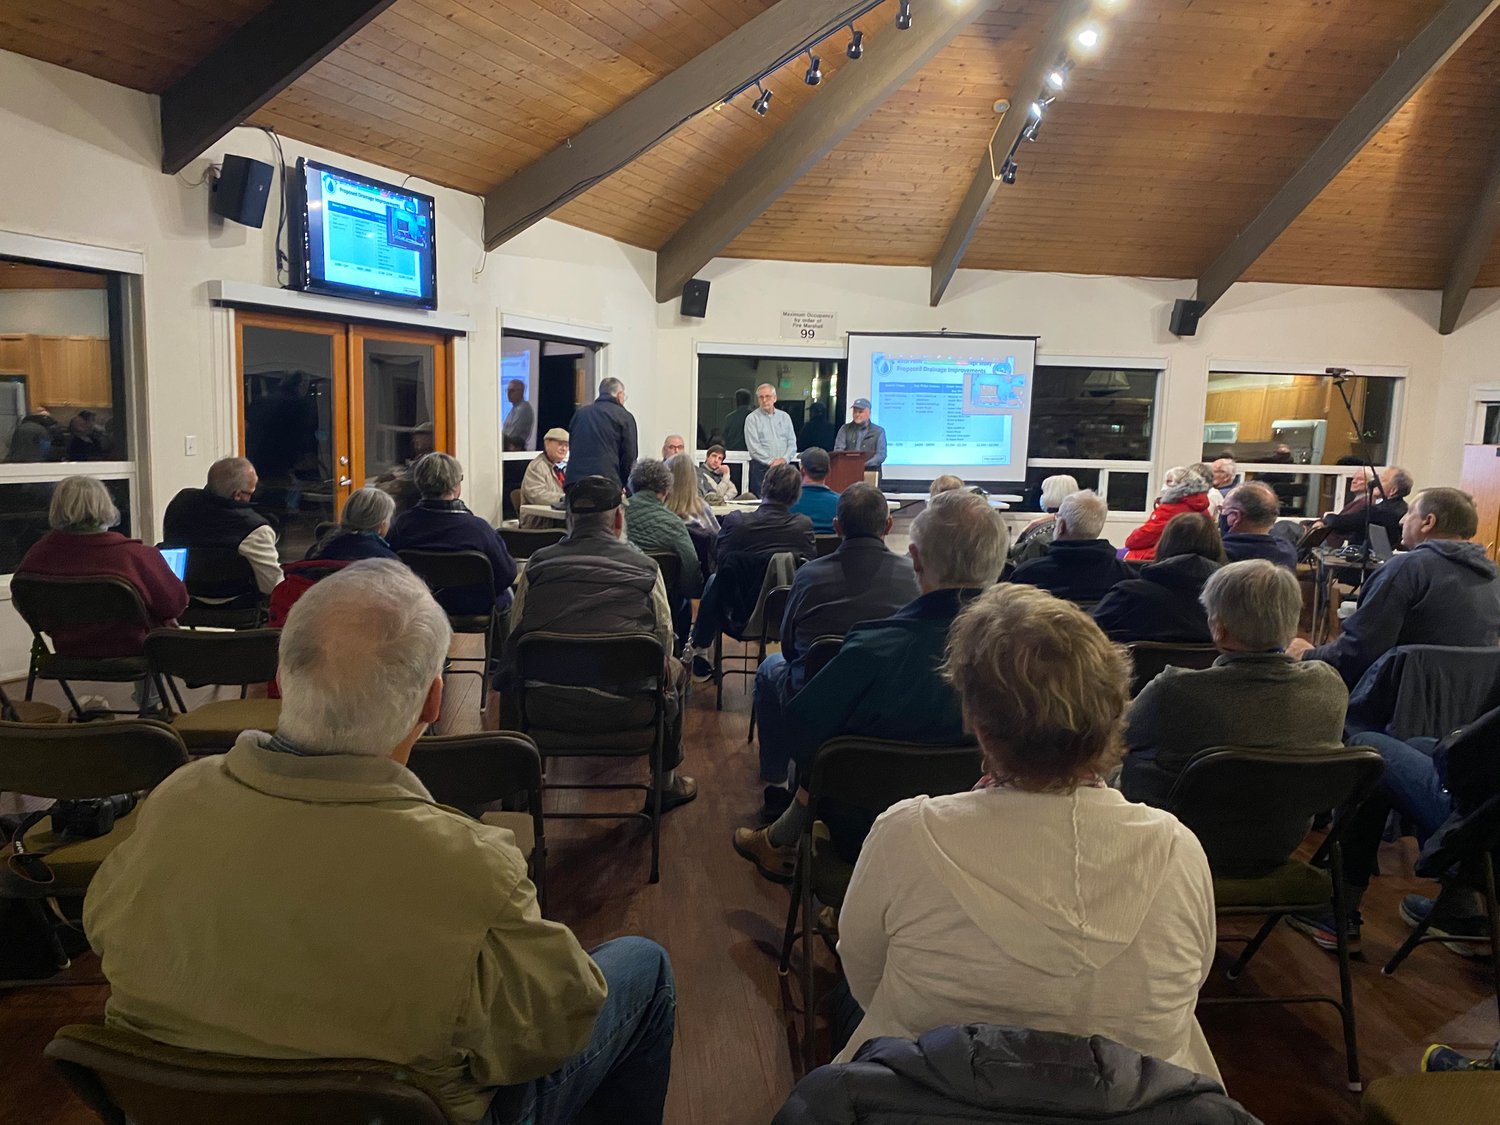 Tetra Tech principal engineer Jerry Scheller presented the preliminary results of a Birch Point water drainage study to about 45 people during the BBWARM meeting at Birch Bay Village on January 18.